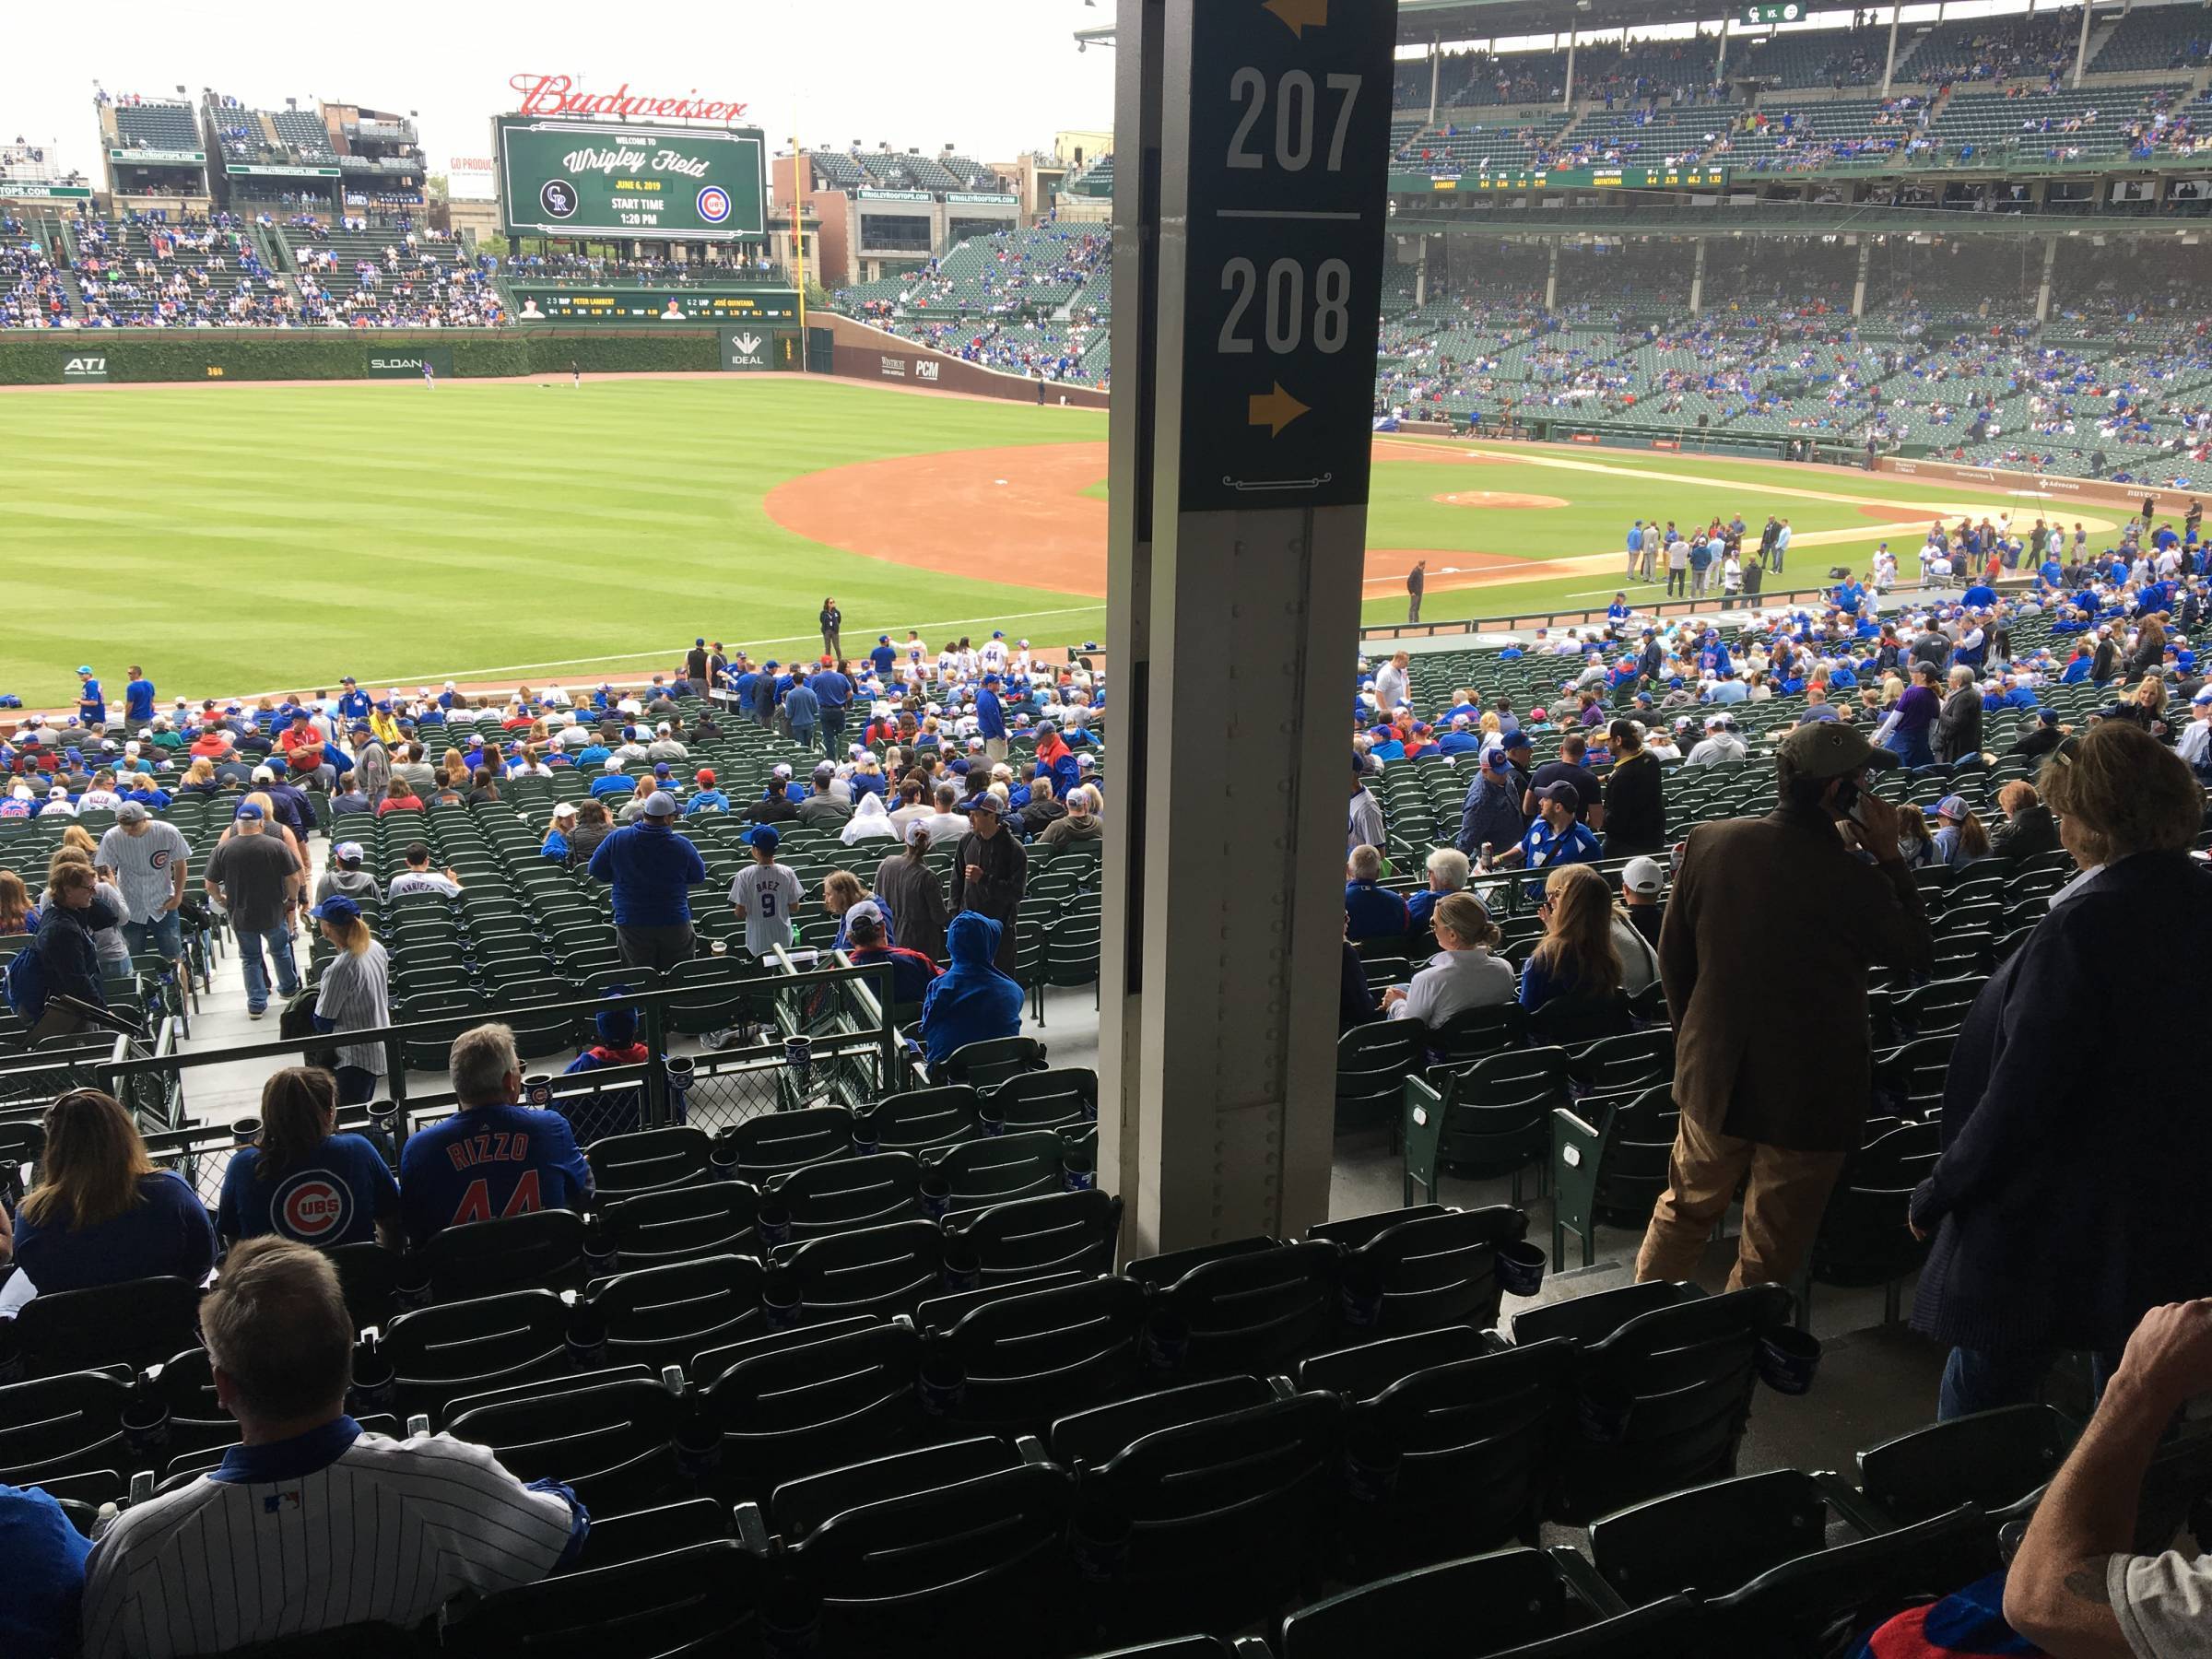 Pole in Section 207 at Wrigley Field